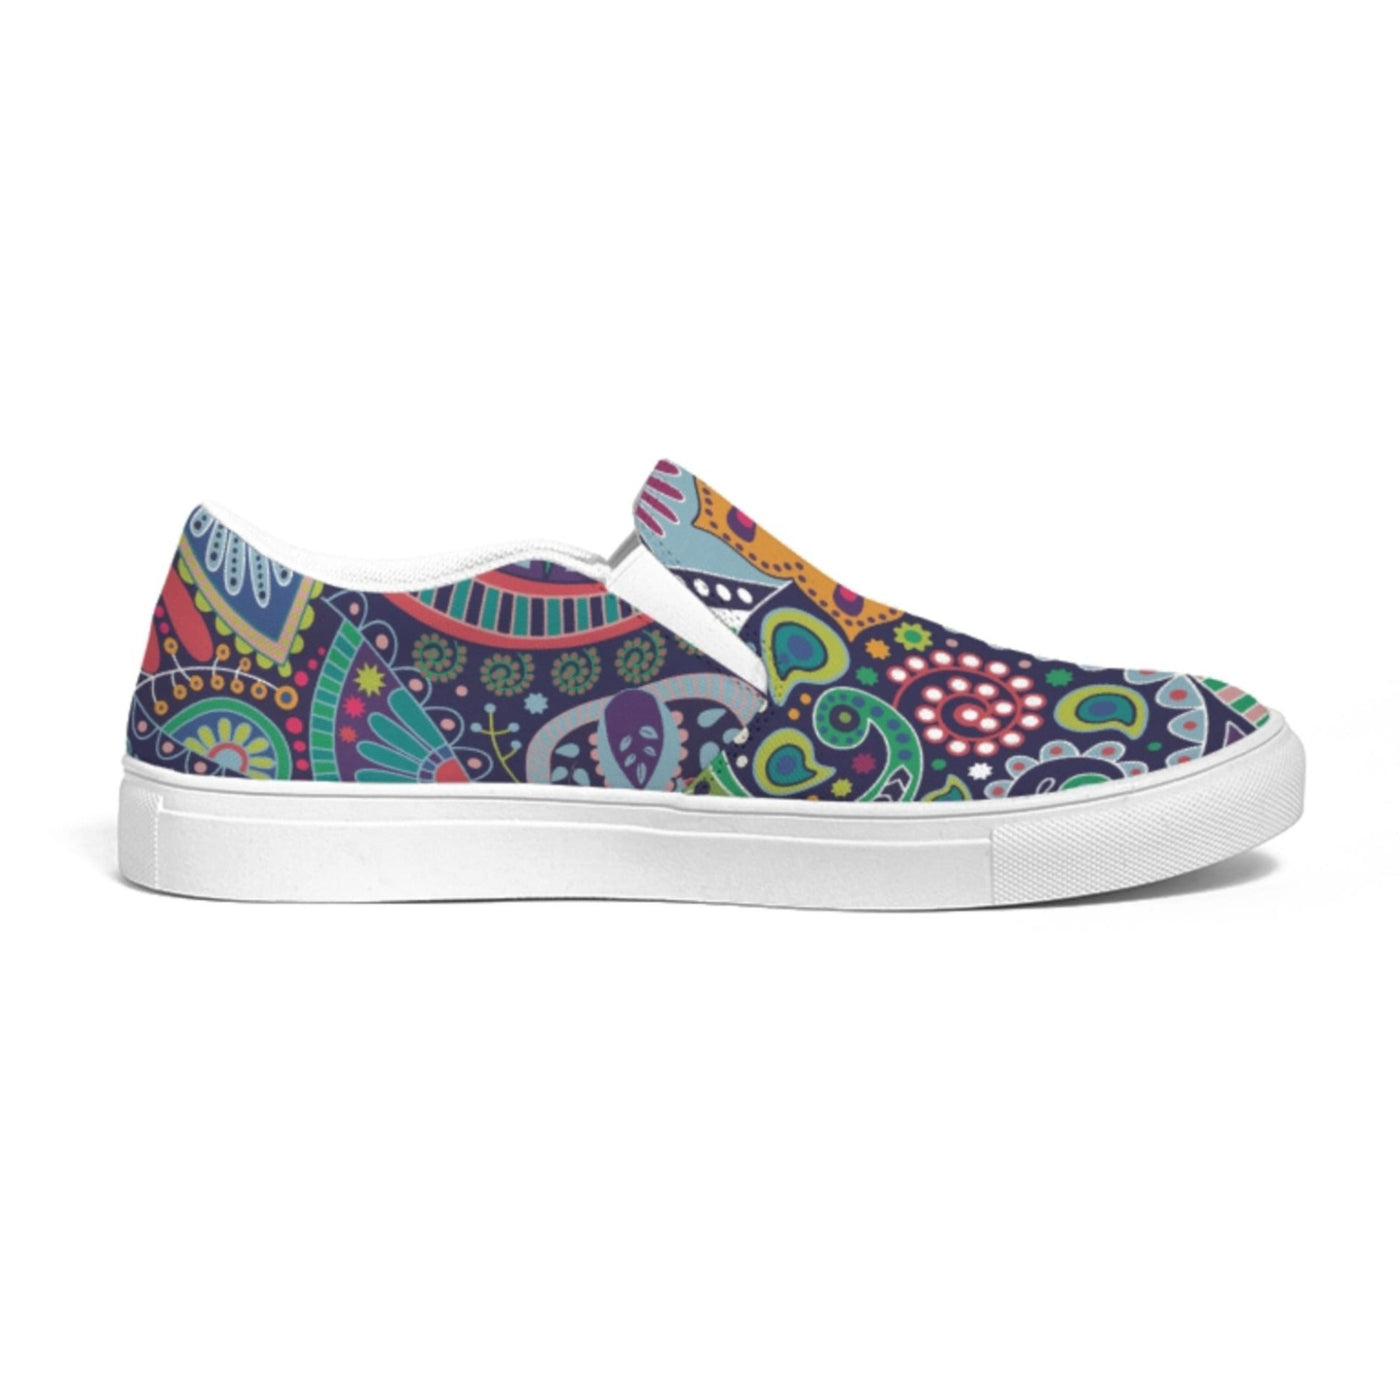 Womens Slip-on Sneakers Blue Floral Paisley Canvas Sports Shoe - Womens |